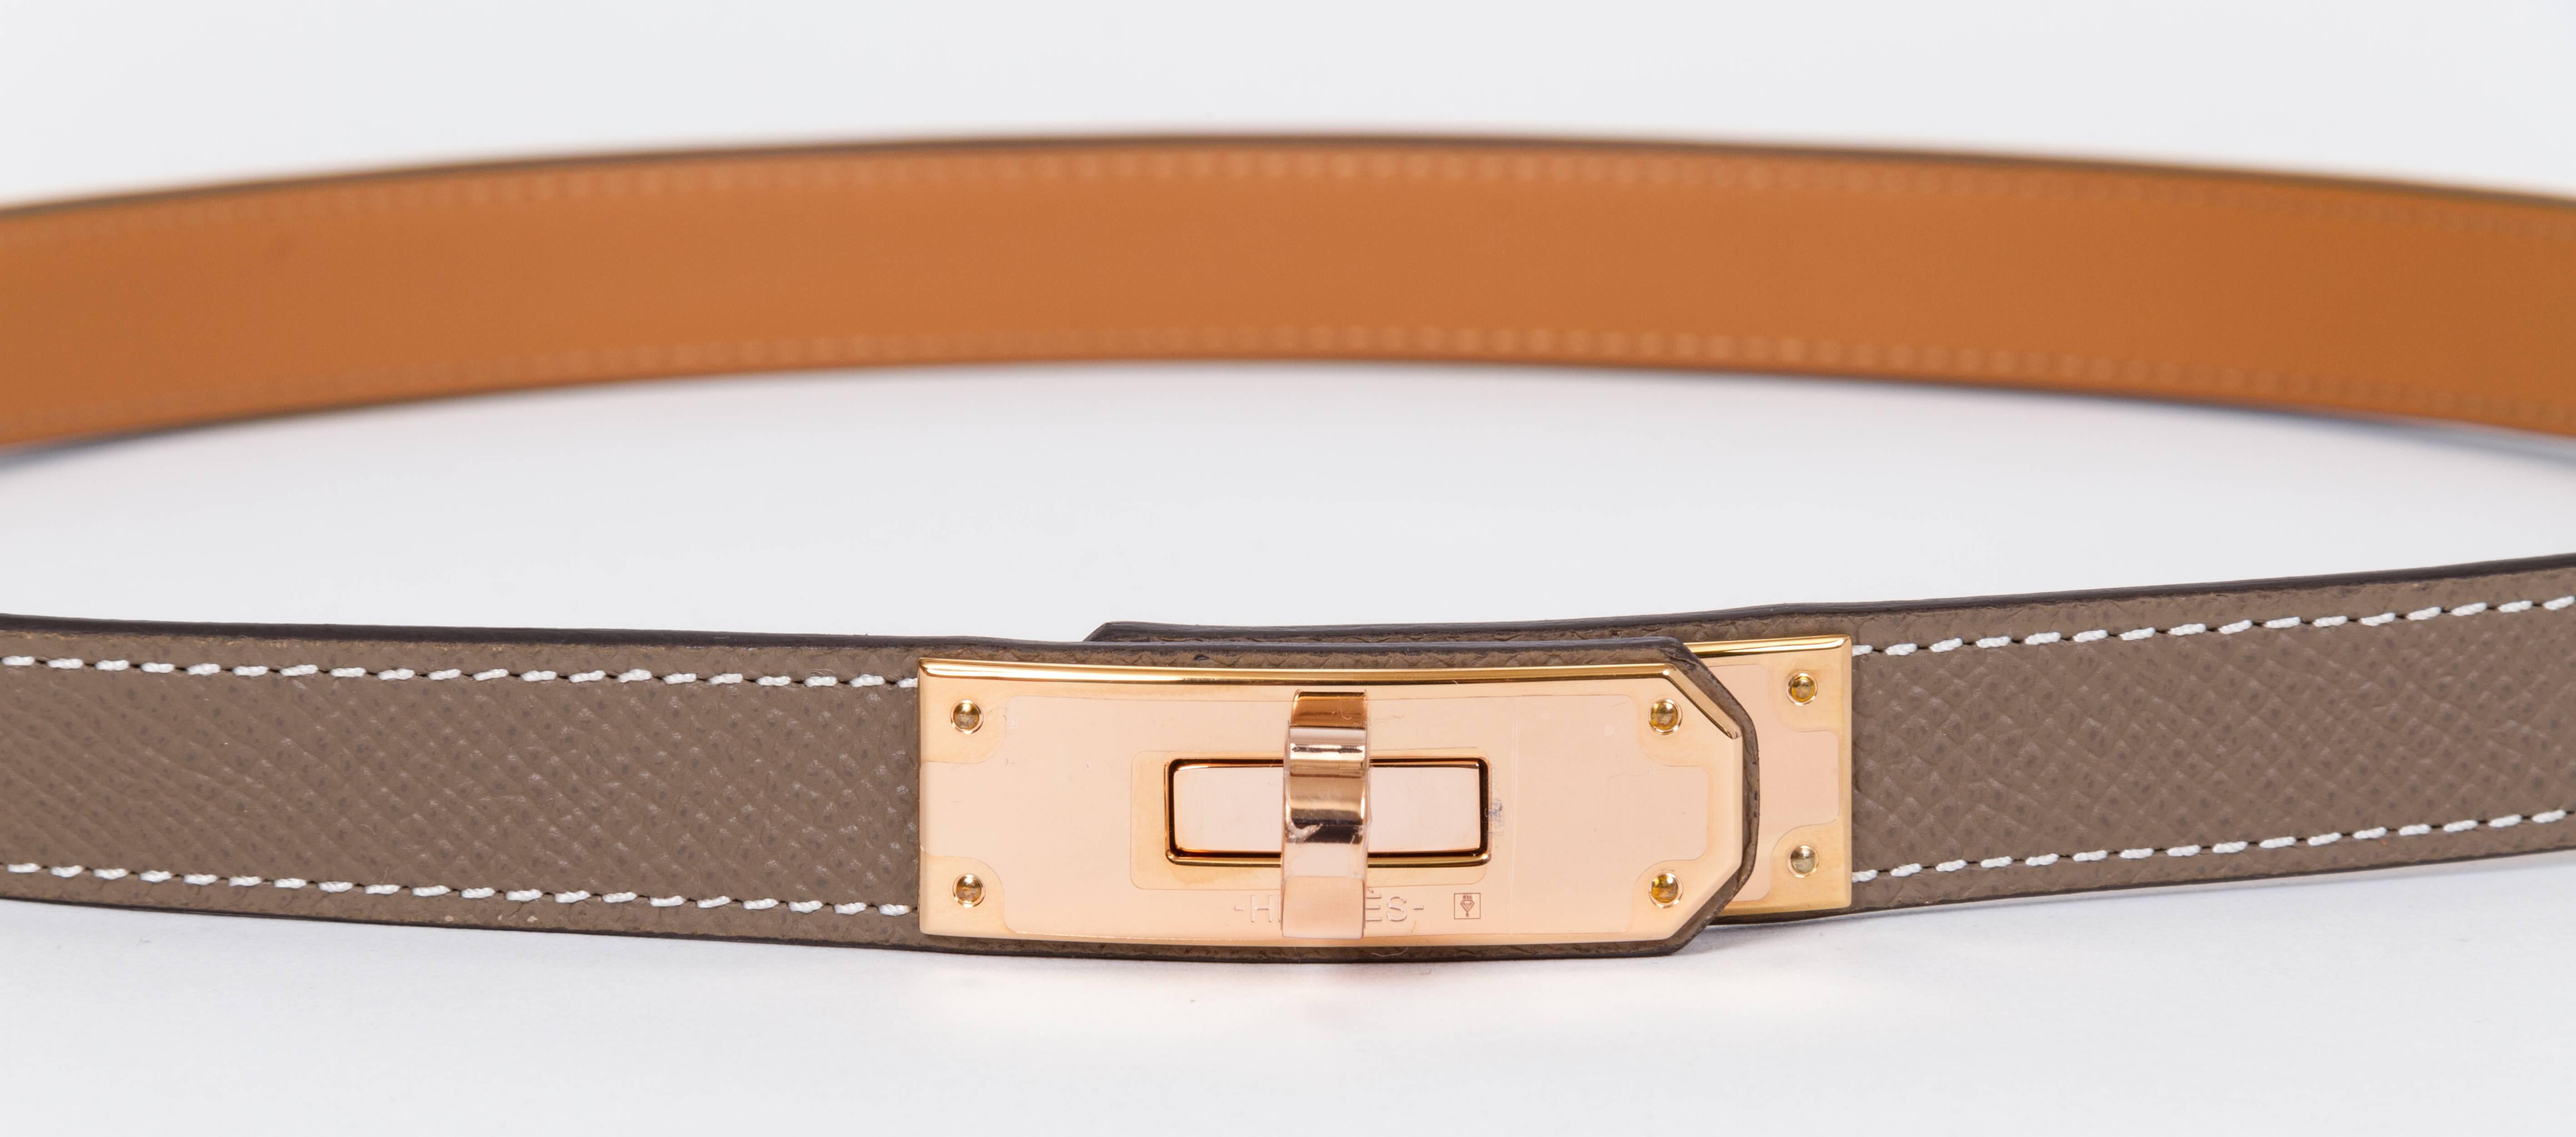 Hermes adjustable Kelly turn lock belt in troupe epsom leather and rose gold hardware. Date stamp A for 2017. Brand new with dust cover, box, ribbon and shopping bag.